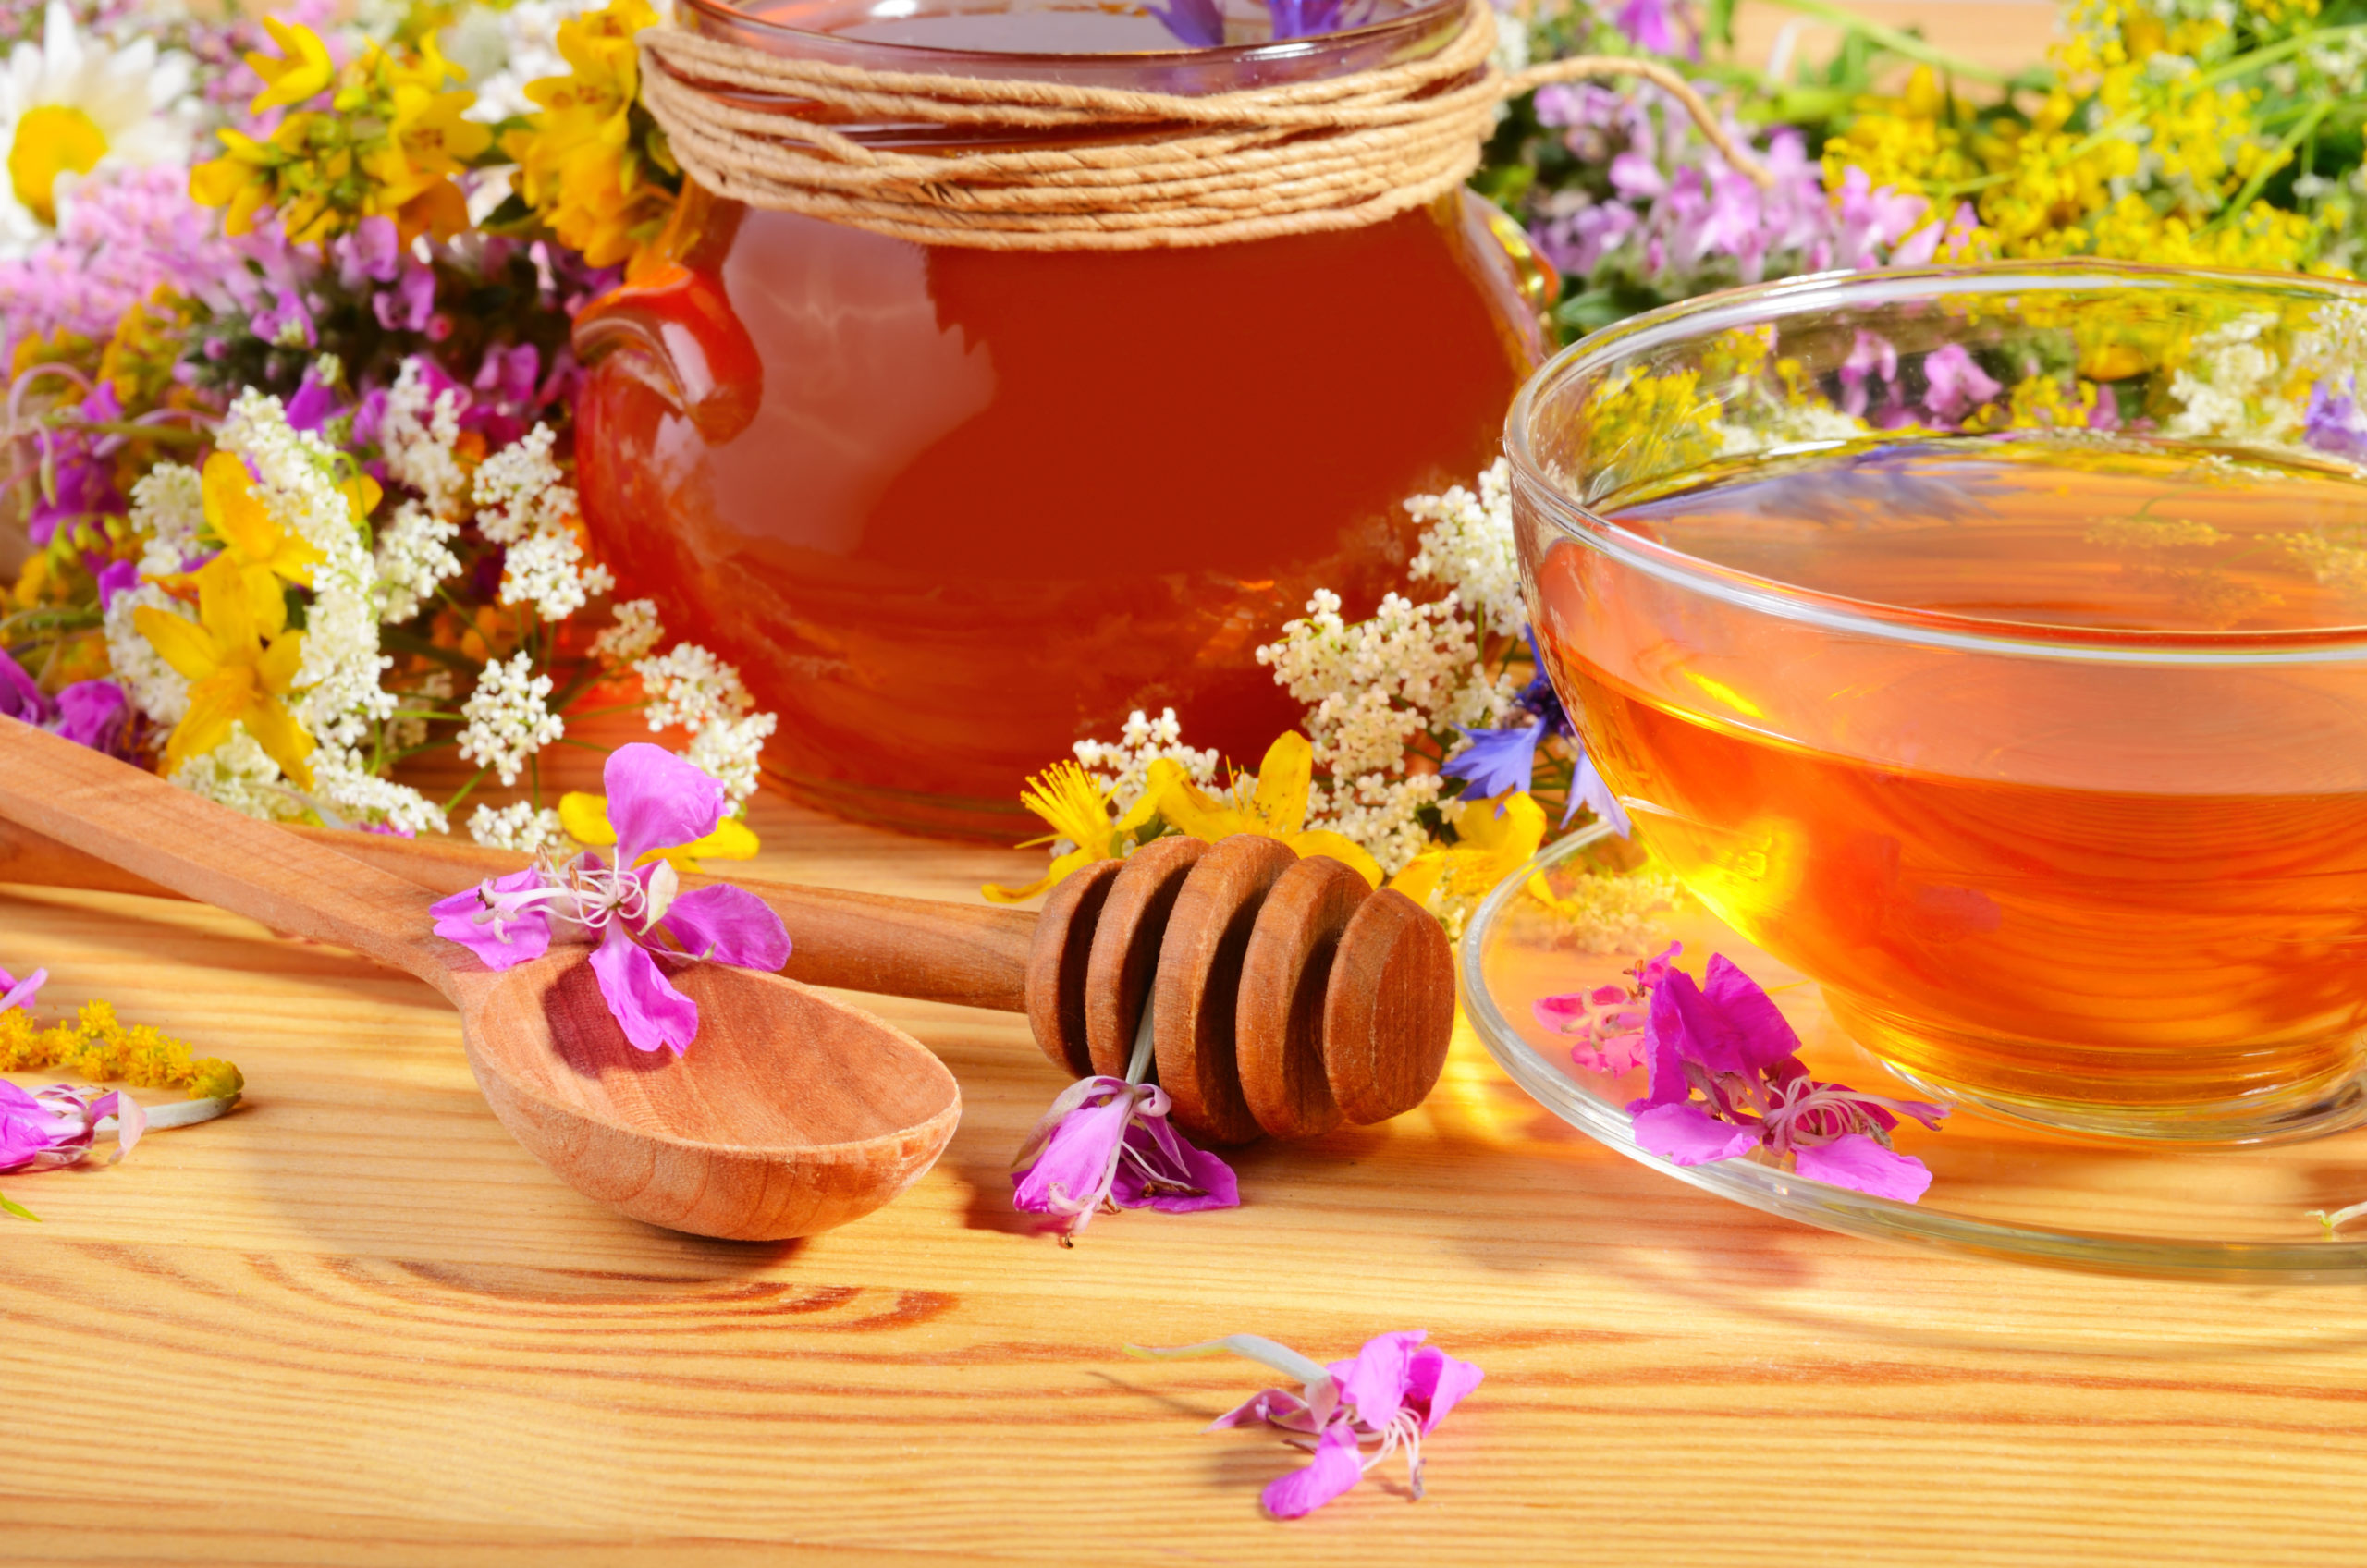 Tea in cup and spoons for honey on wooden table with flowers